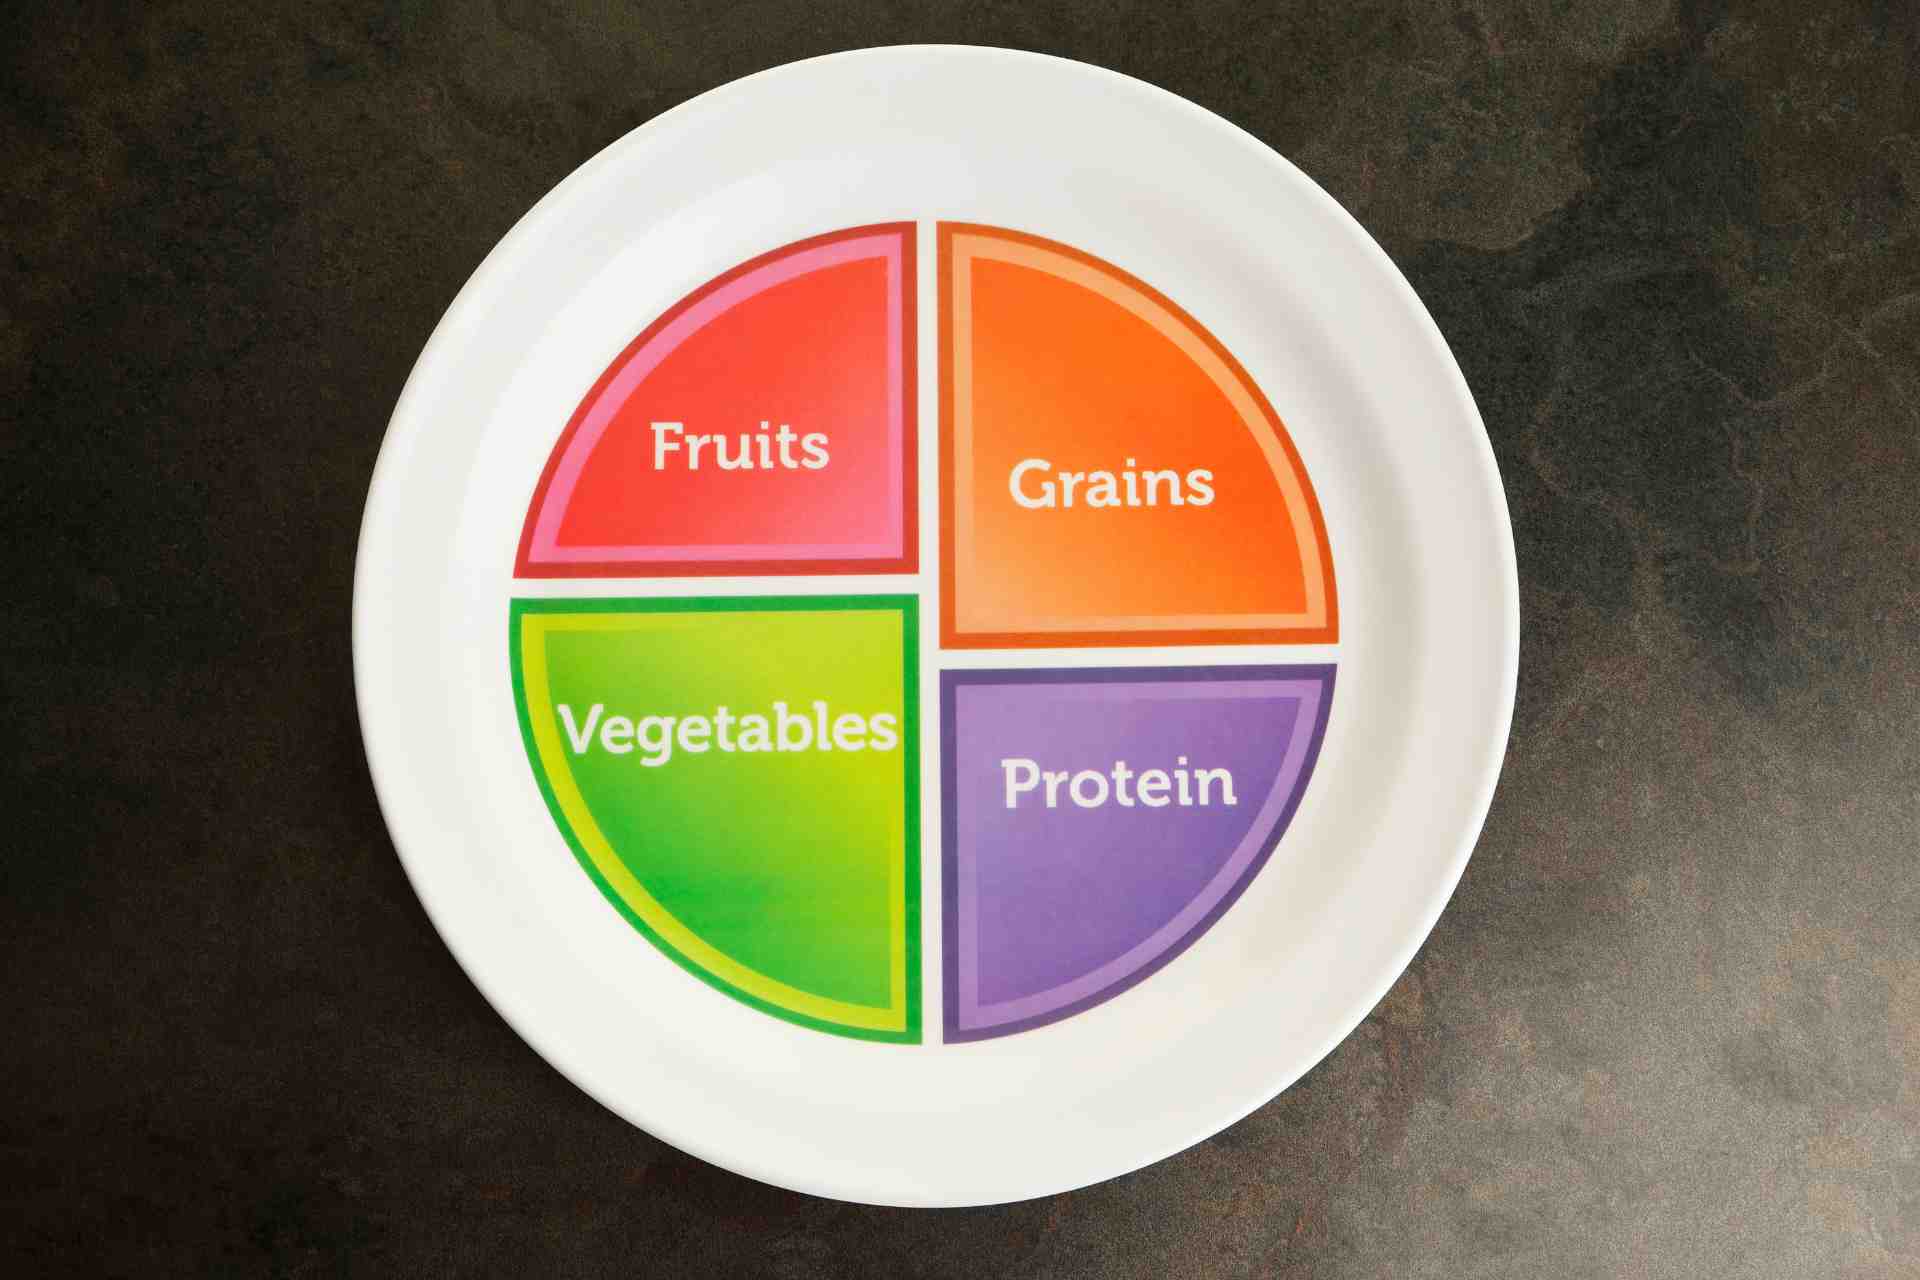 Portion Control Plate: I Want to Lose Weight But I Have No Self-Control